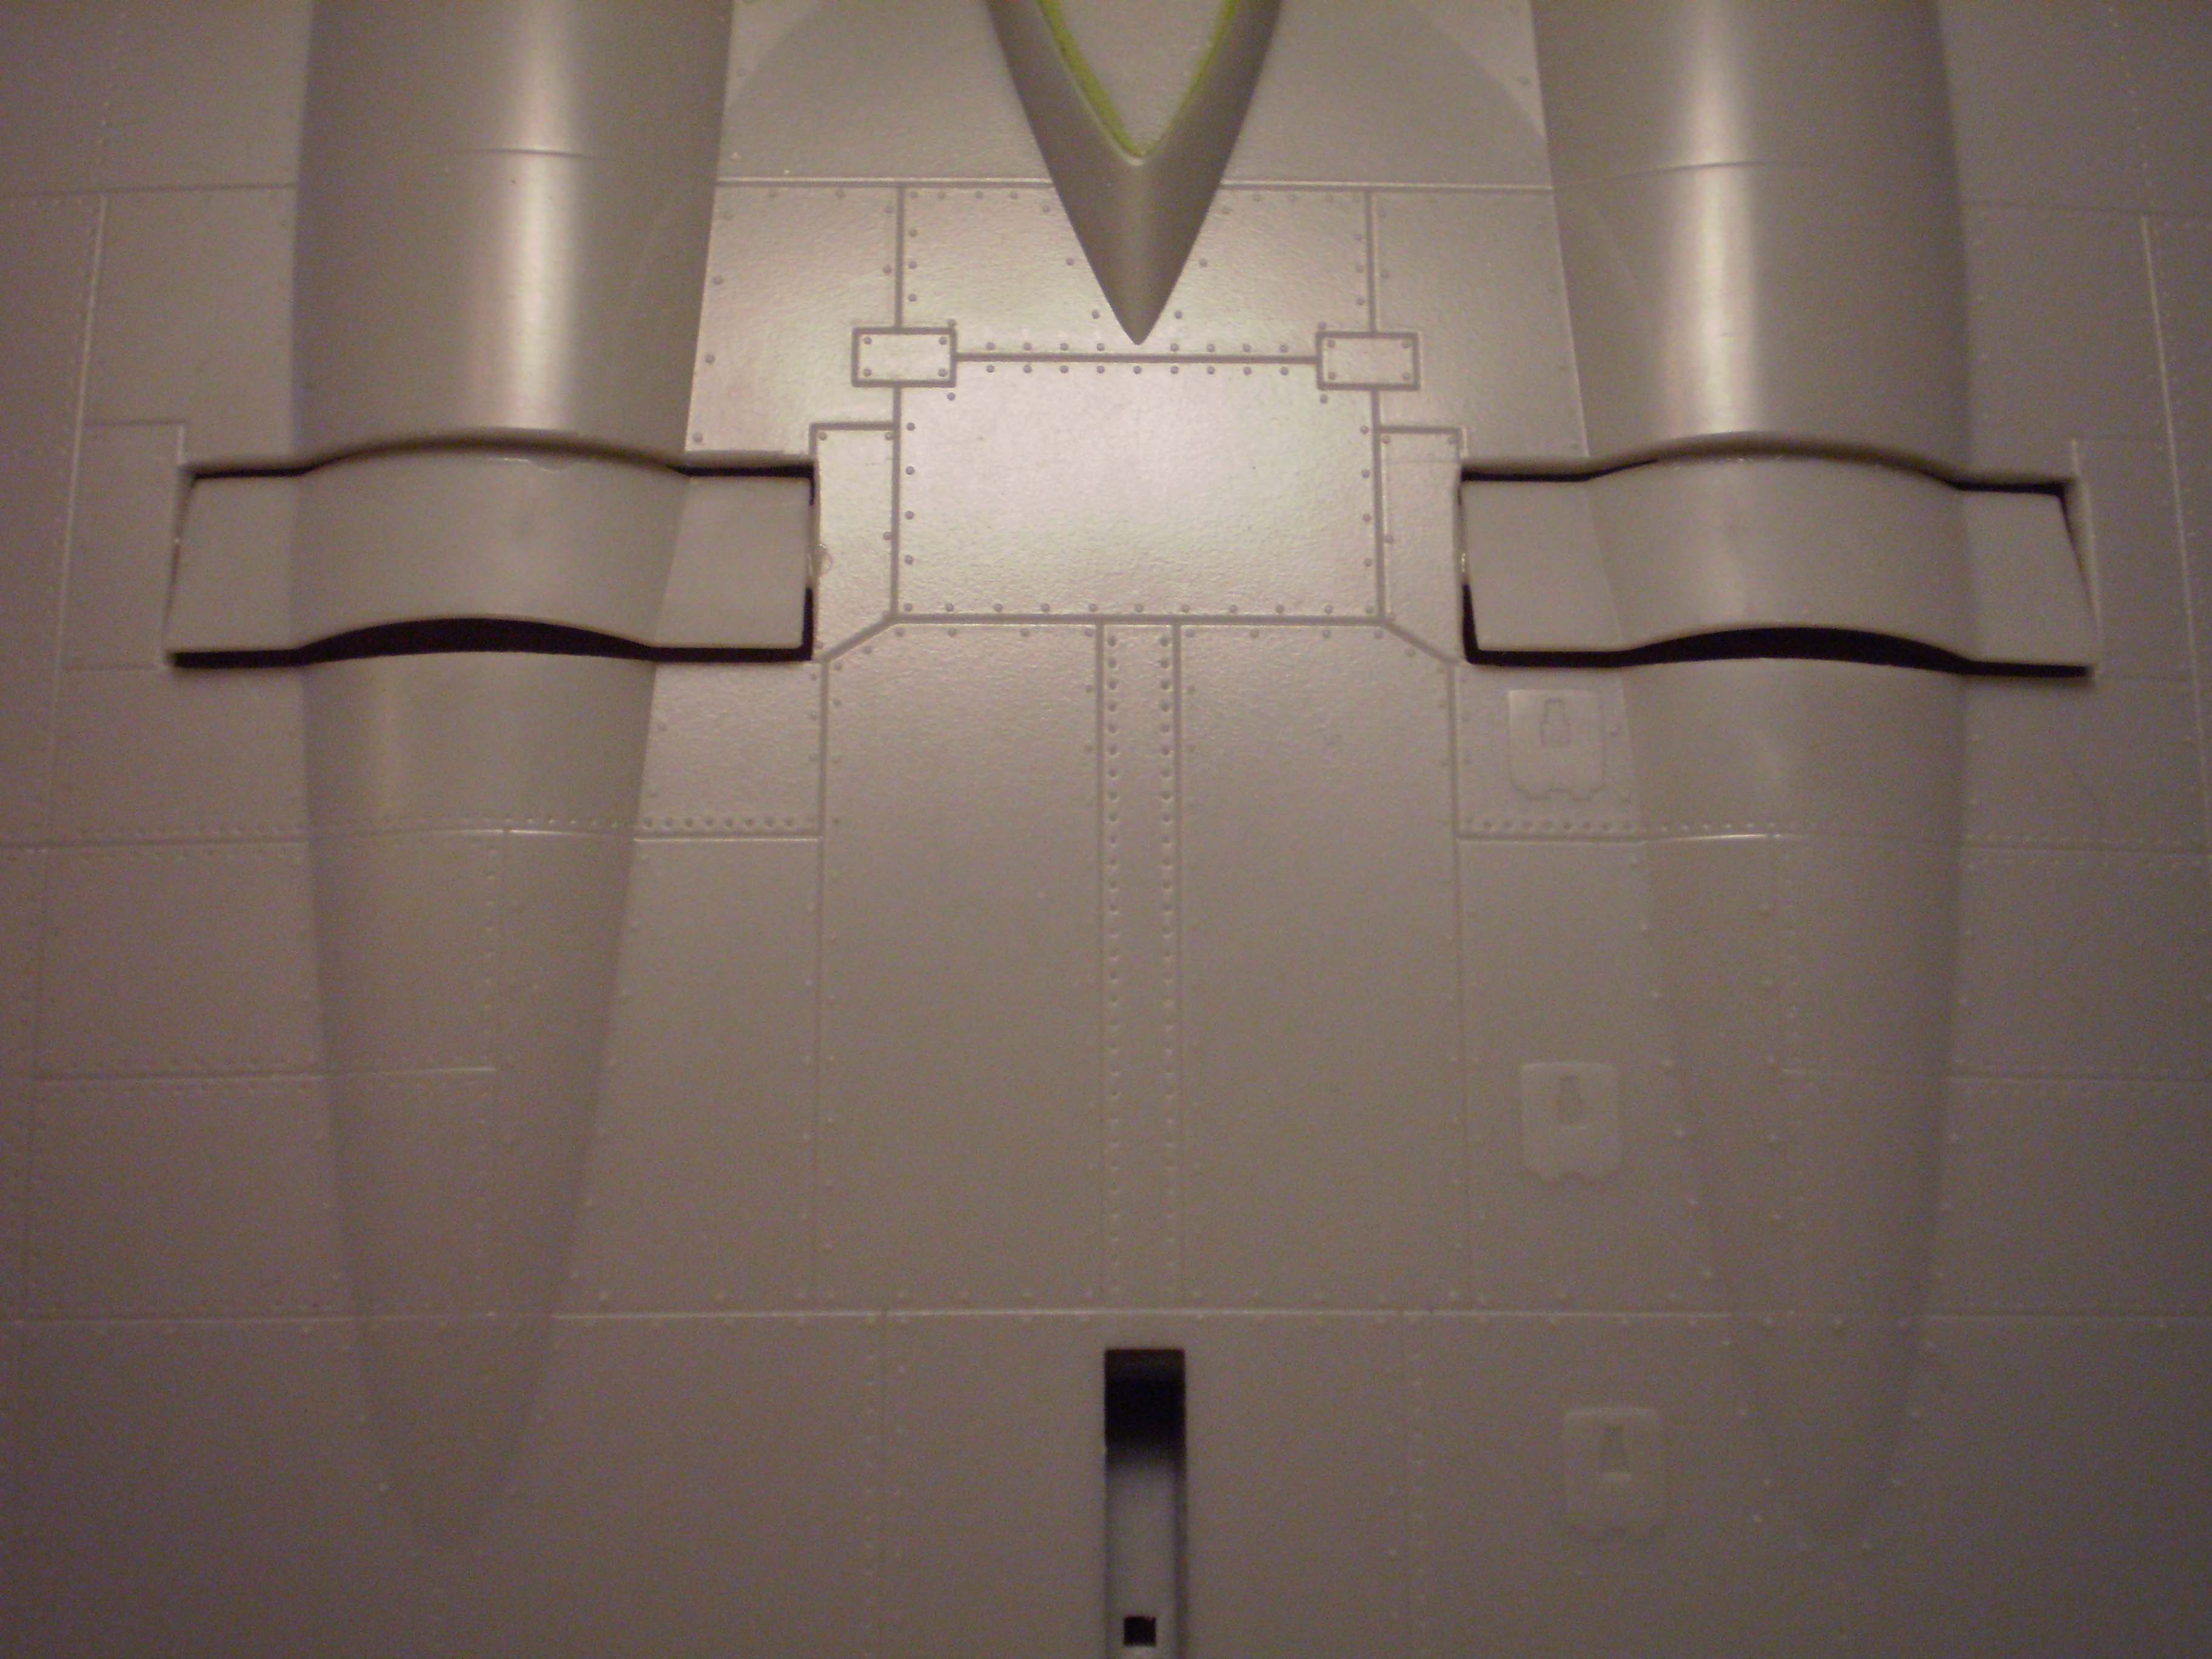 Top view of exit flaps mounted.